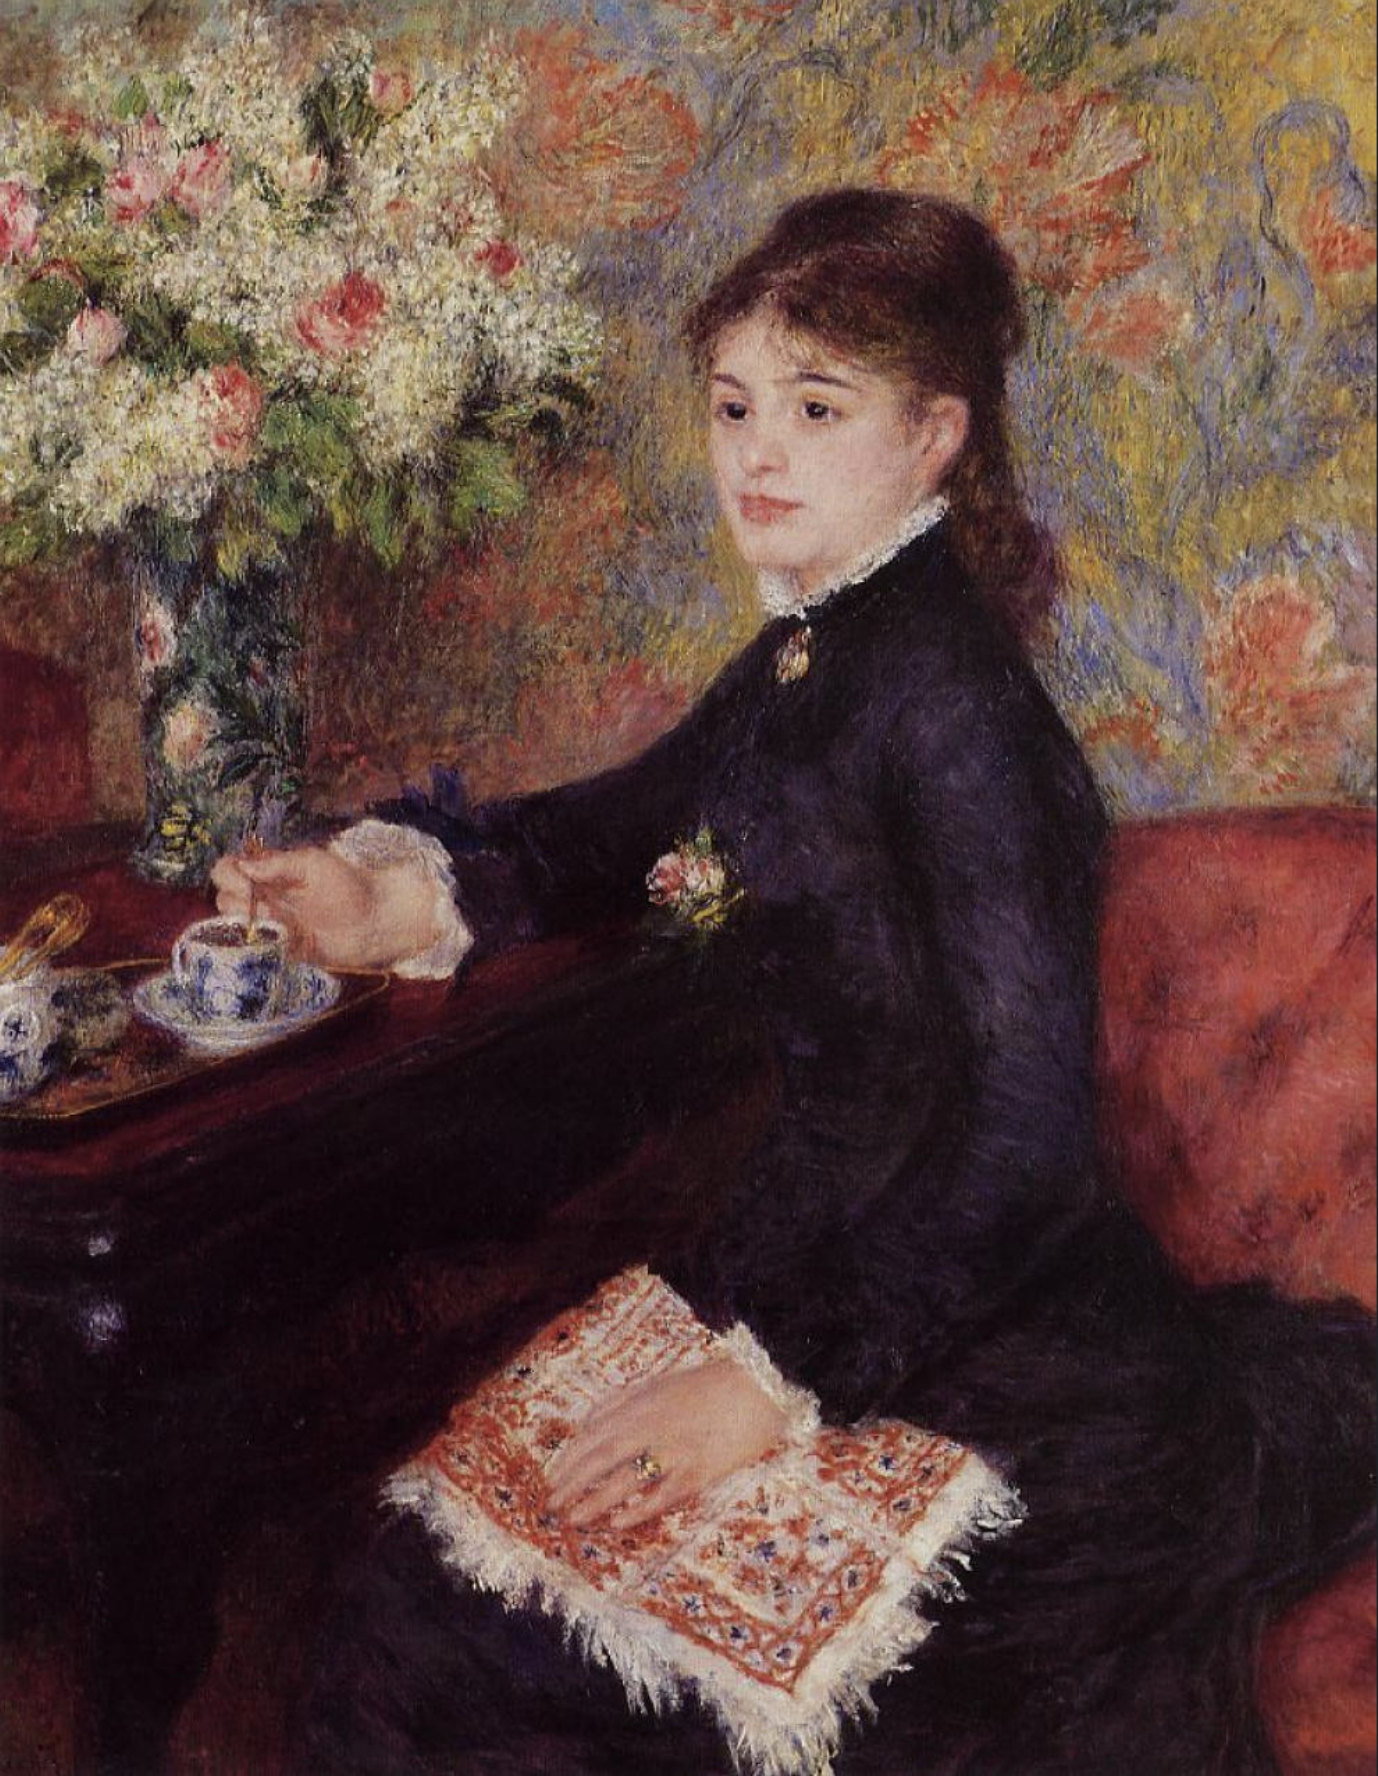 Pierre-Auguste Renoir, The Cup of Chocolate